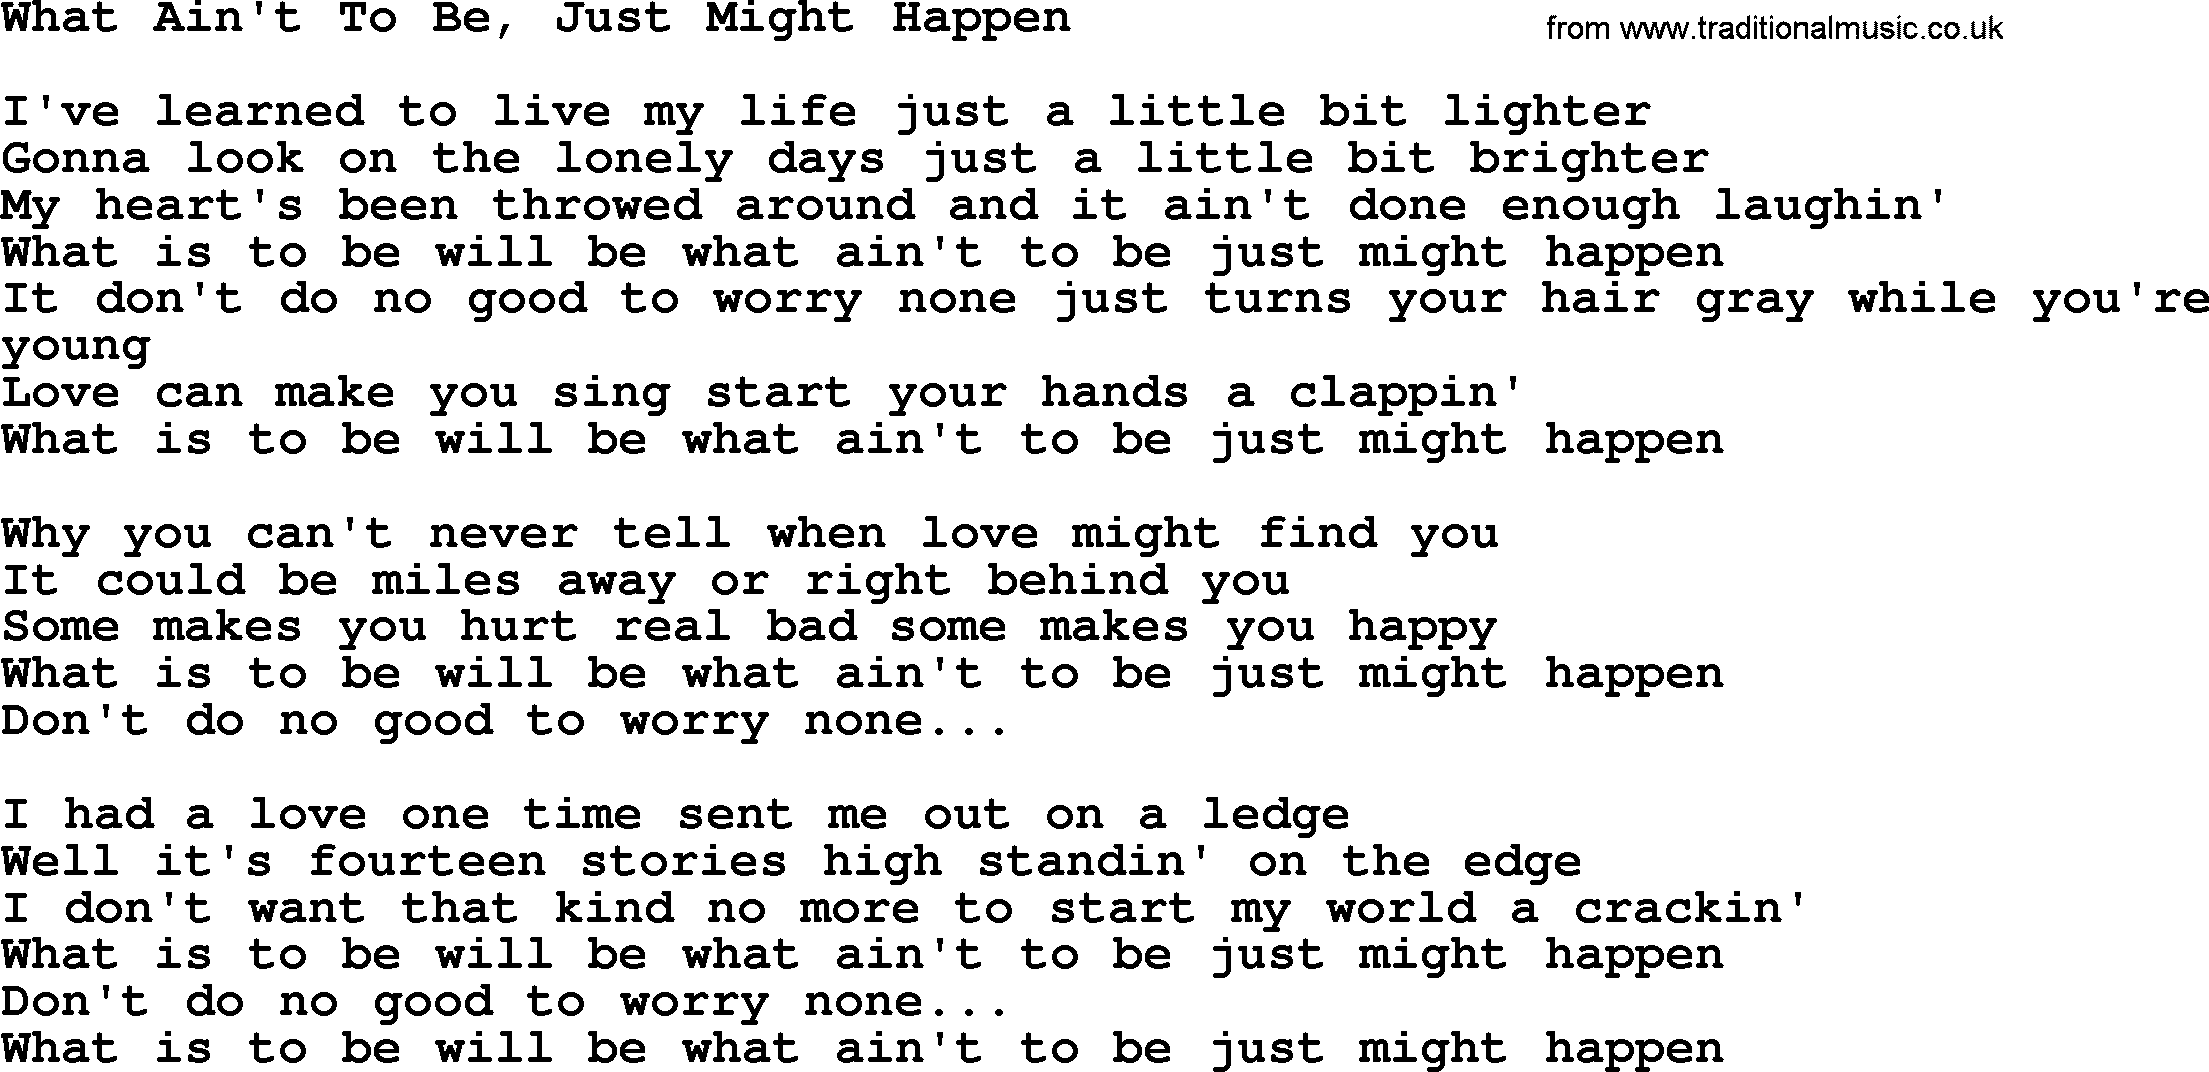 Dolly Parton song What Ain't To Be, Just Might Happen.txt lyrics